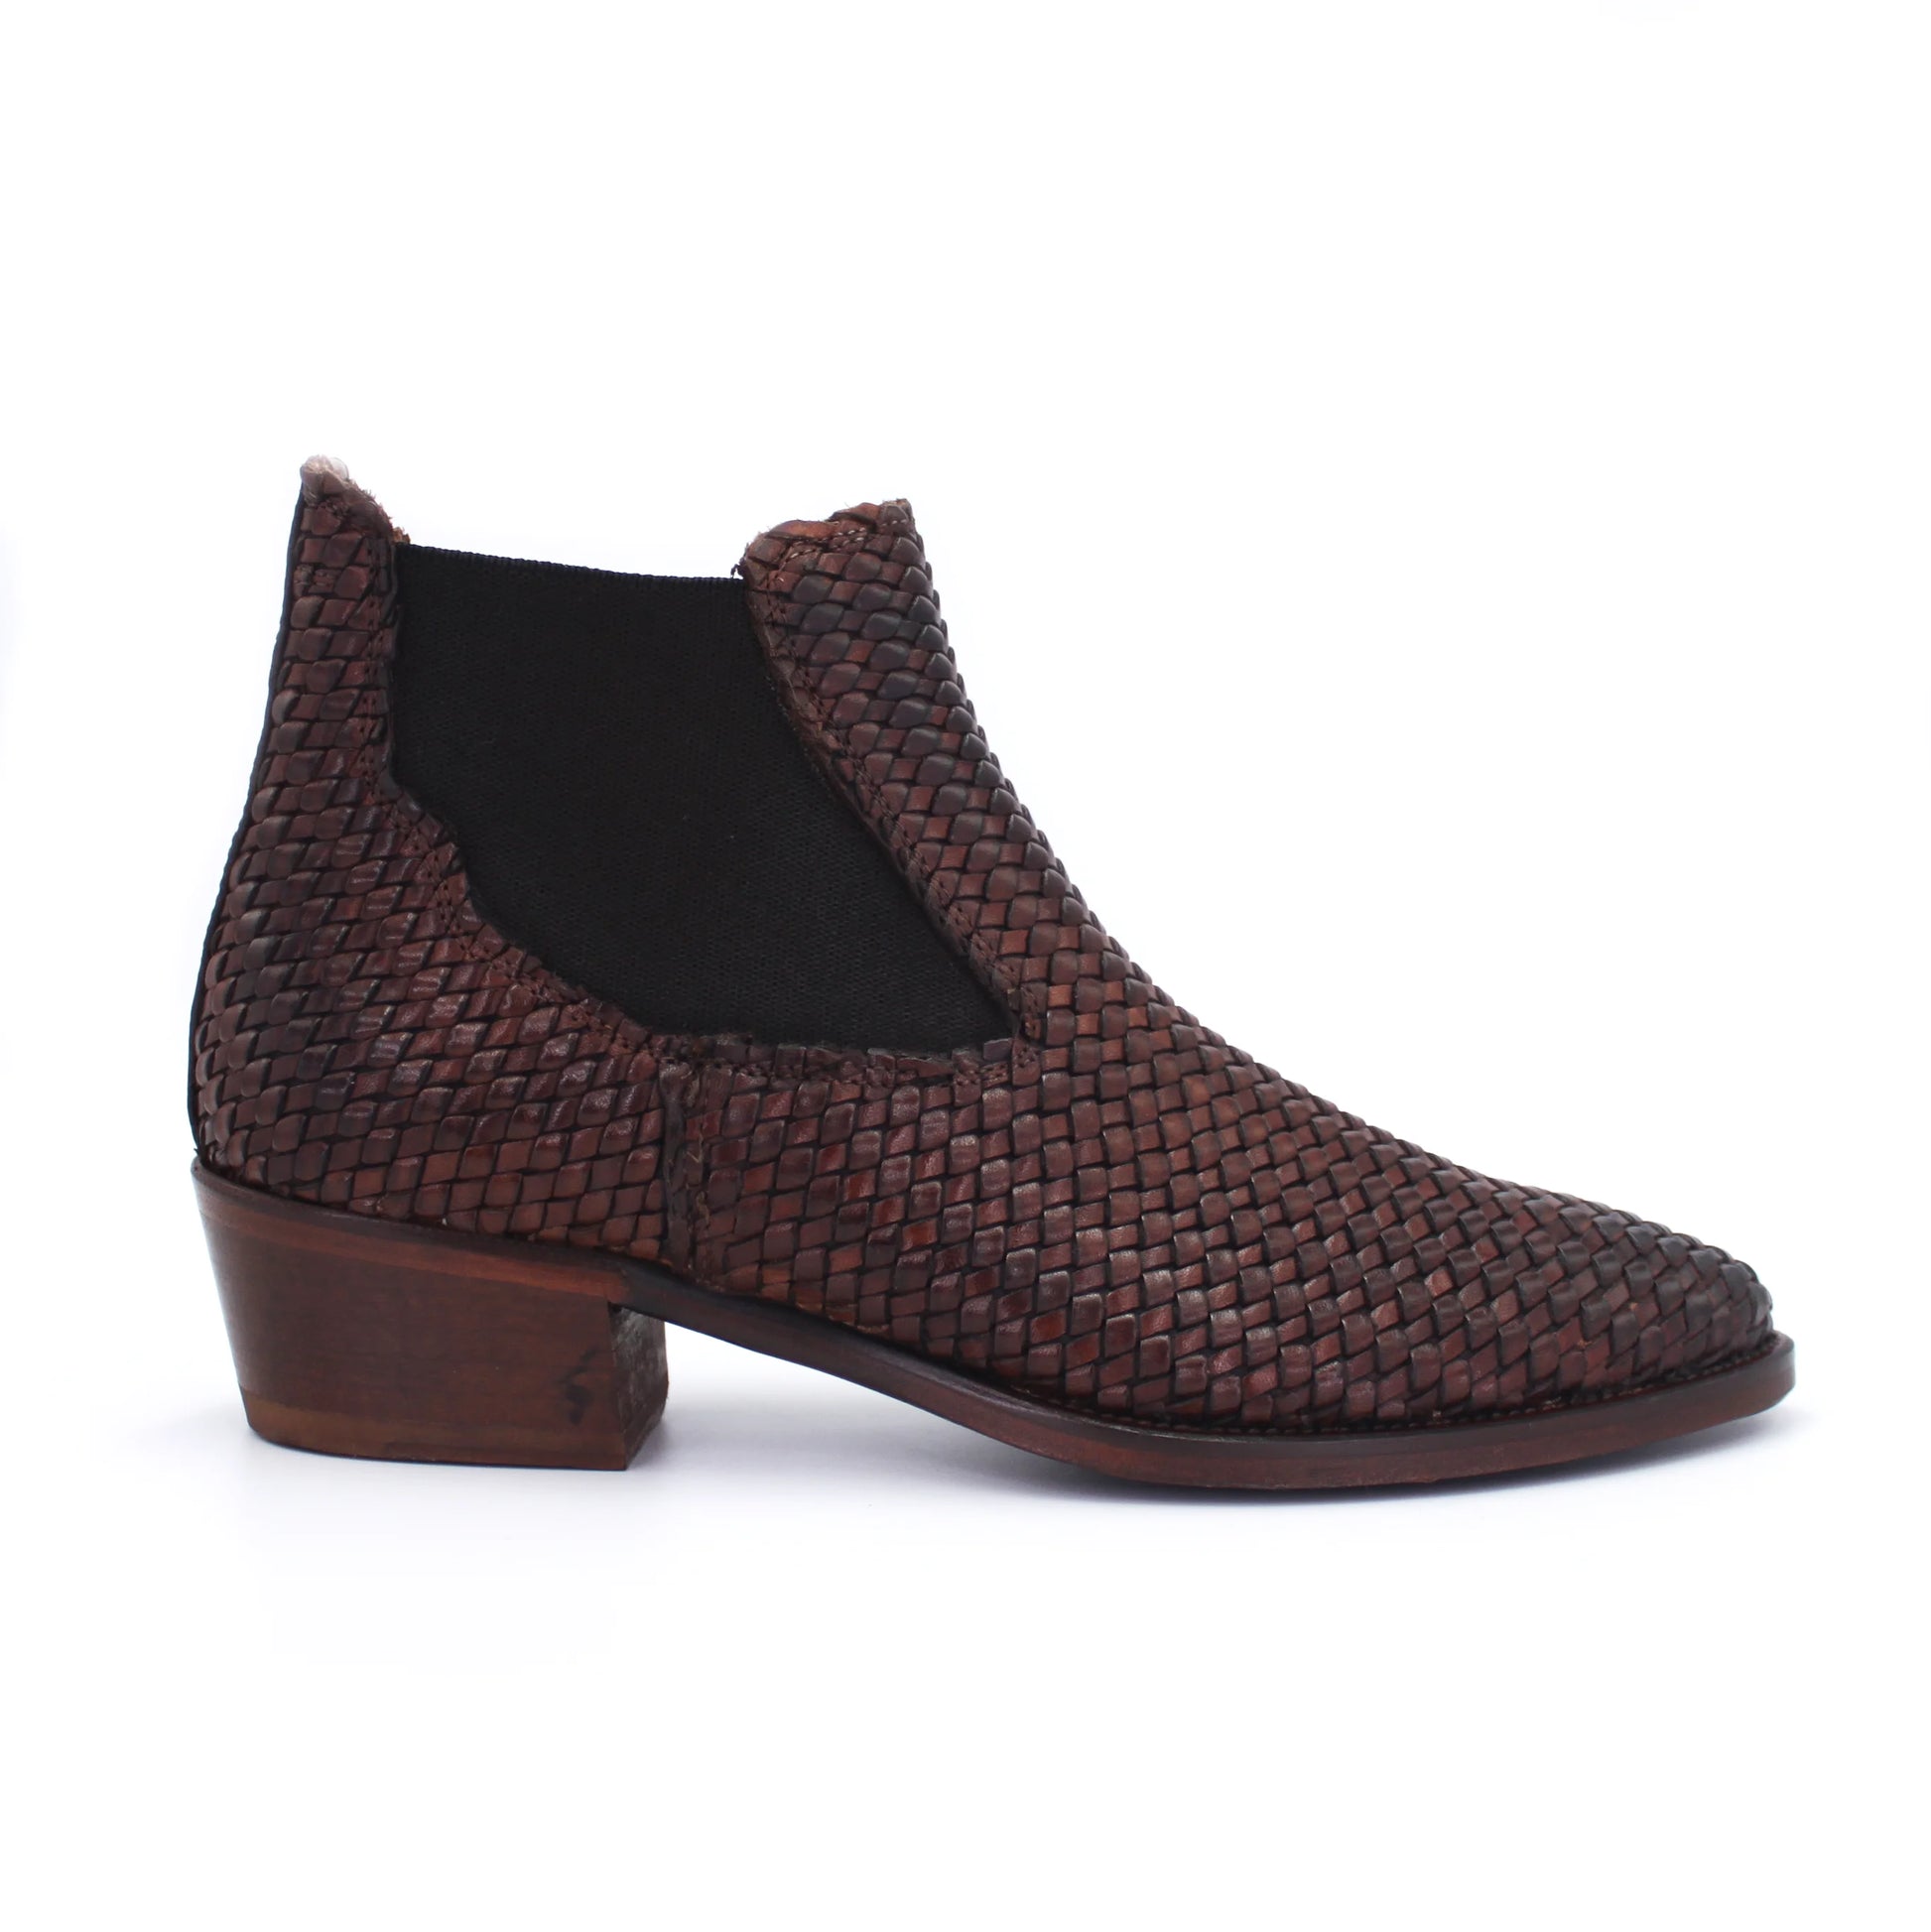 Shop Handmade Italian Leather Woven Boot in Brown (9410) or browse our range of hand-made Italian boots for women in leather or suede in-store at Aliverti Durban or Cape Town, or shop online. We deliver in South Africa & offer multiple payment plans as well as accept multiple safe & secure payment methods.